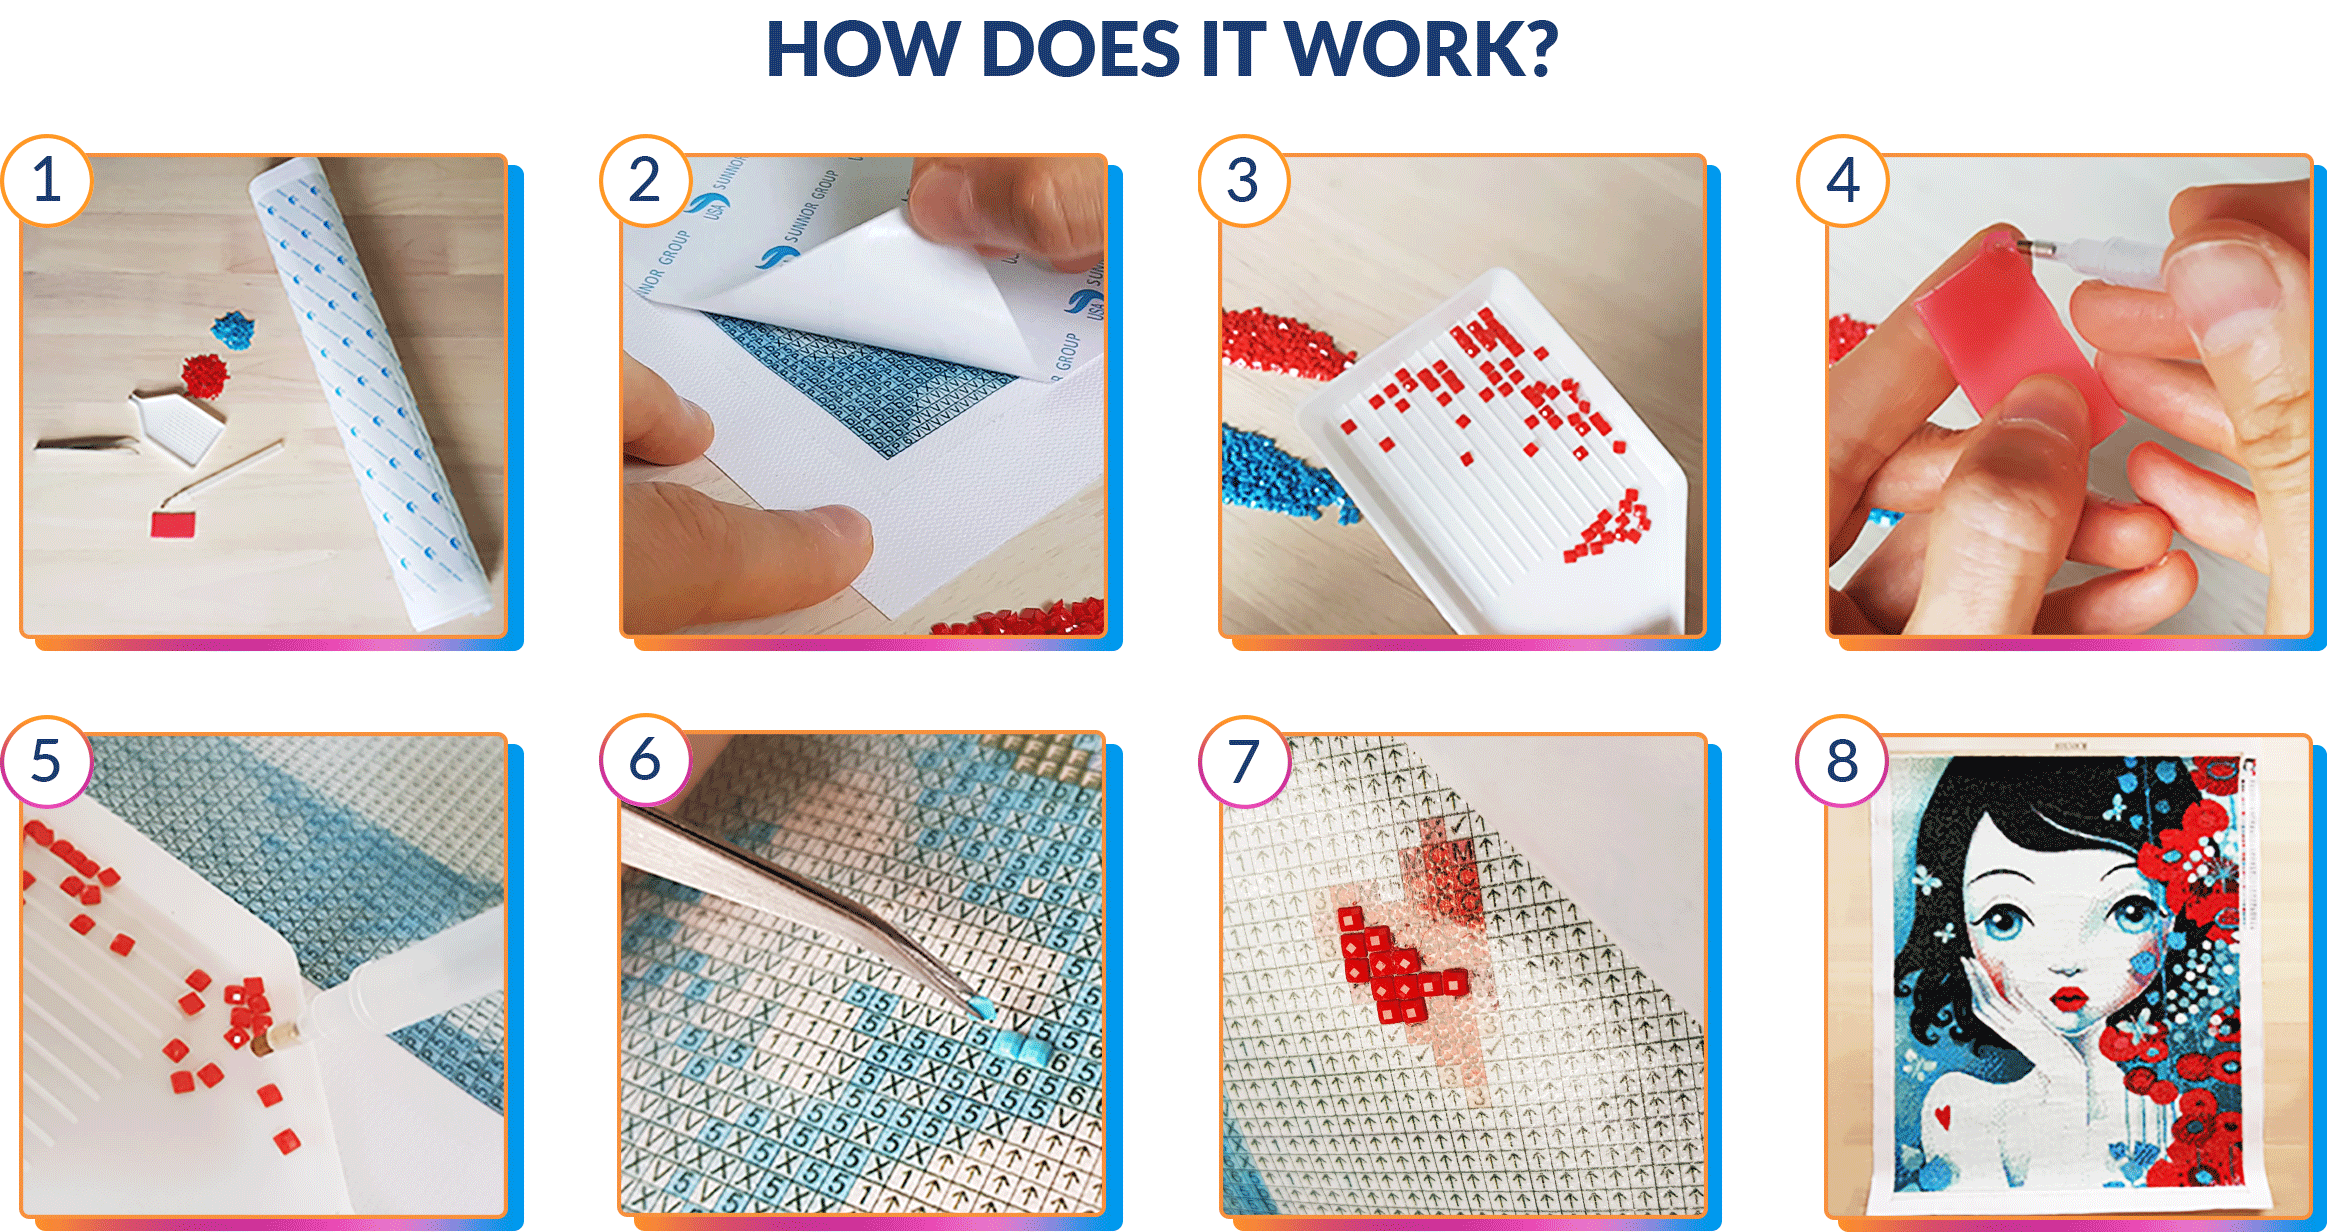 What To Look For When Purchasing a Diamond Painting Kit? - Diamond Painting  Guide